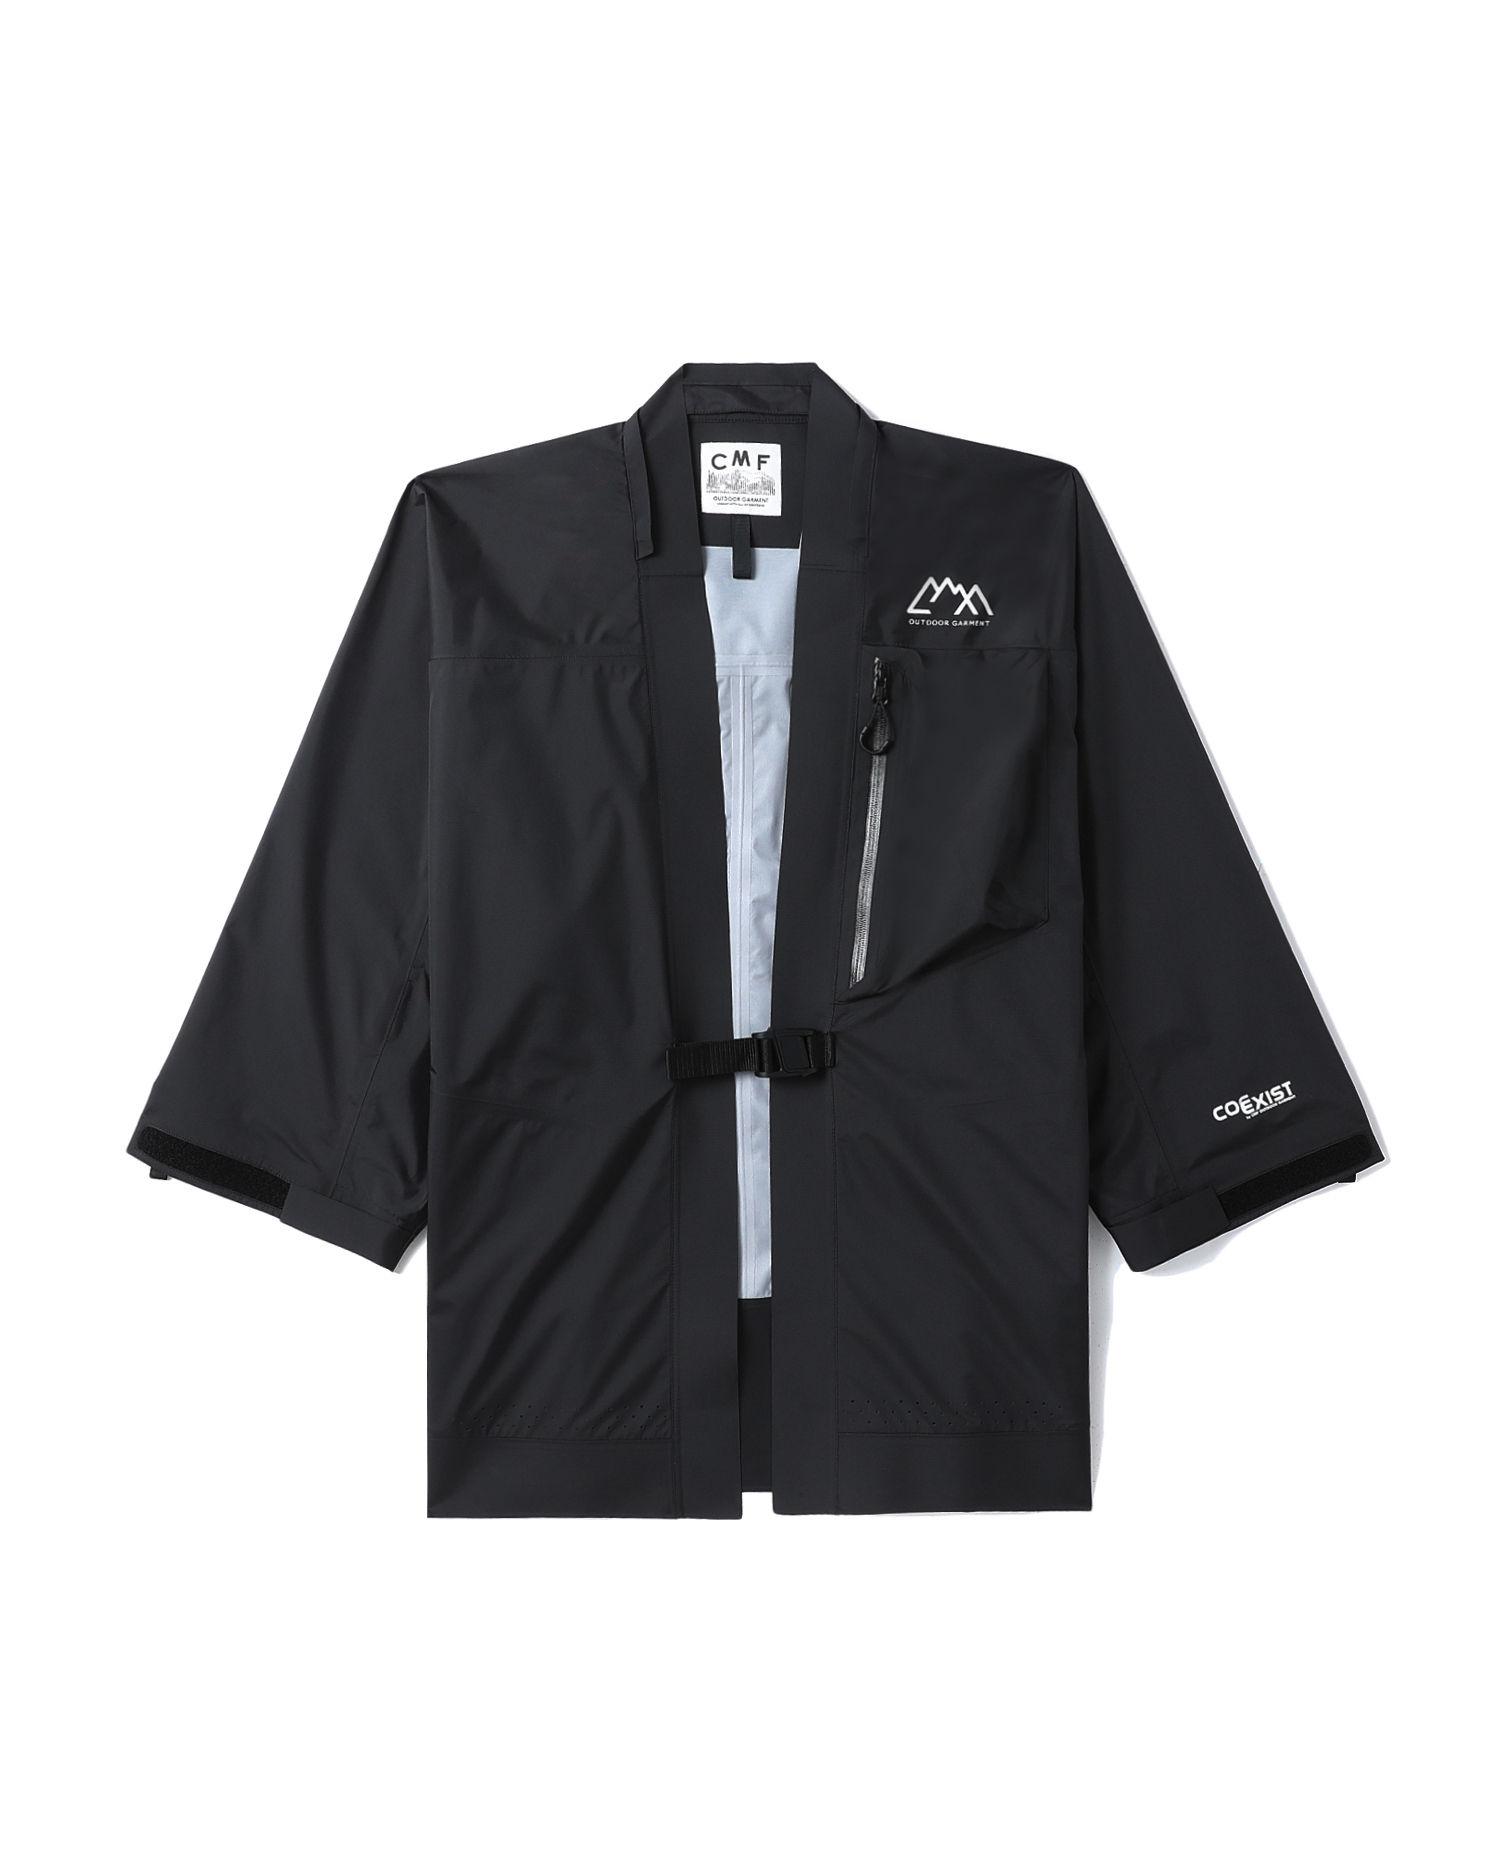 Relaxed jacket by COMFY OUTDOOR GARMENT